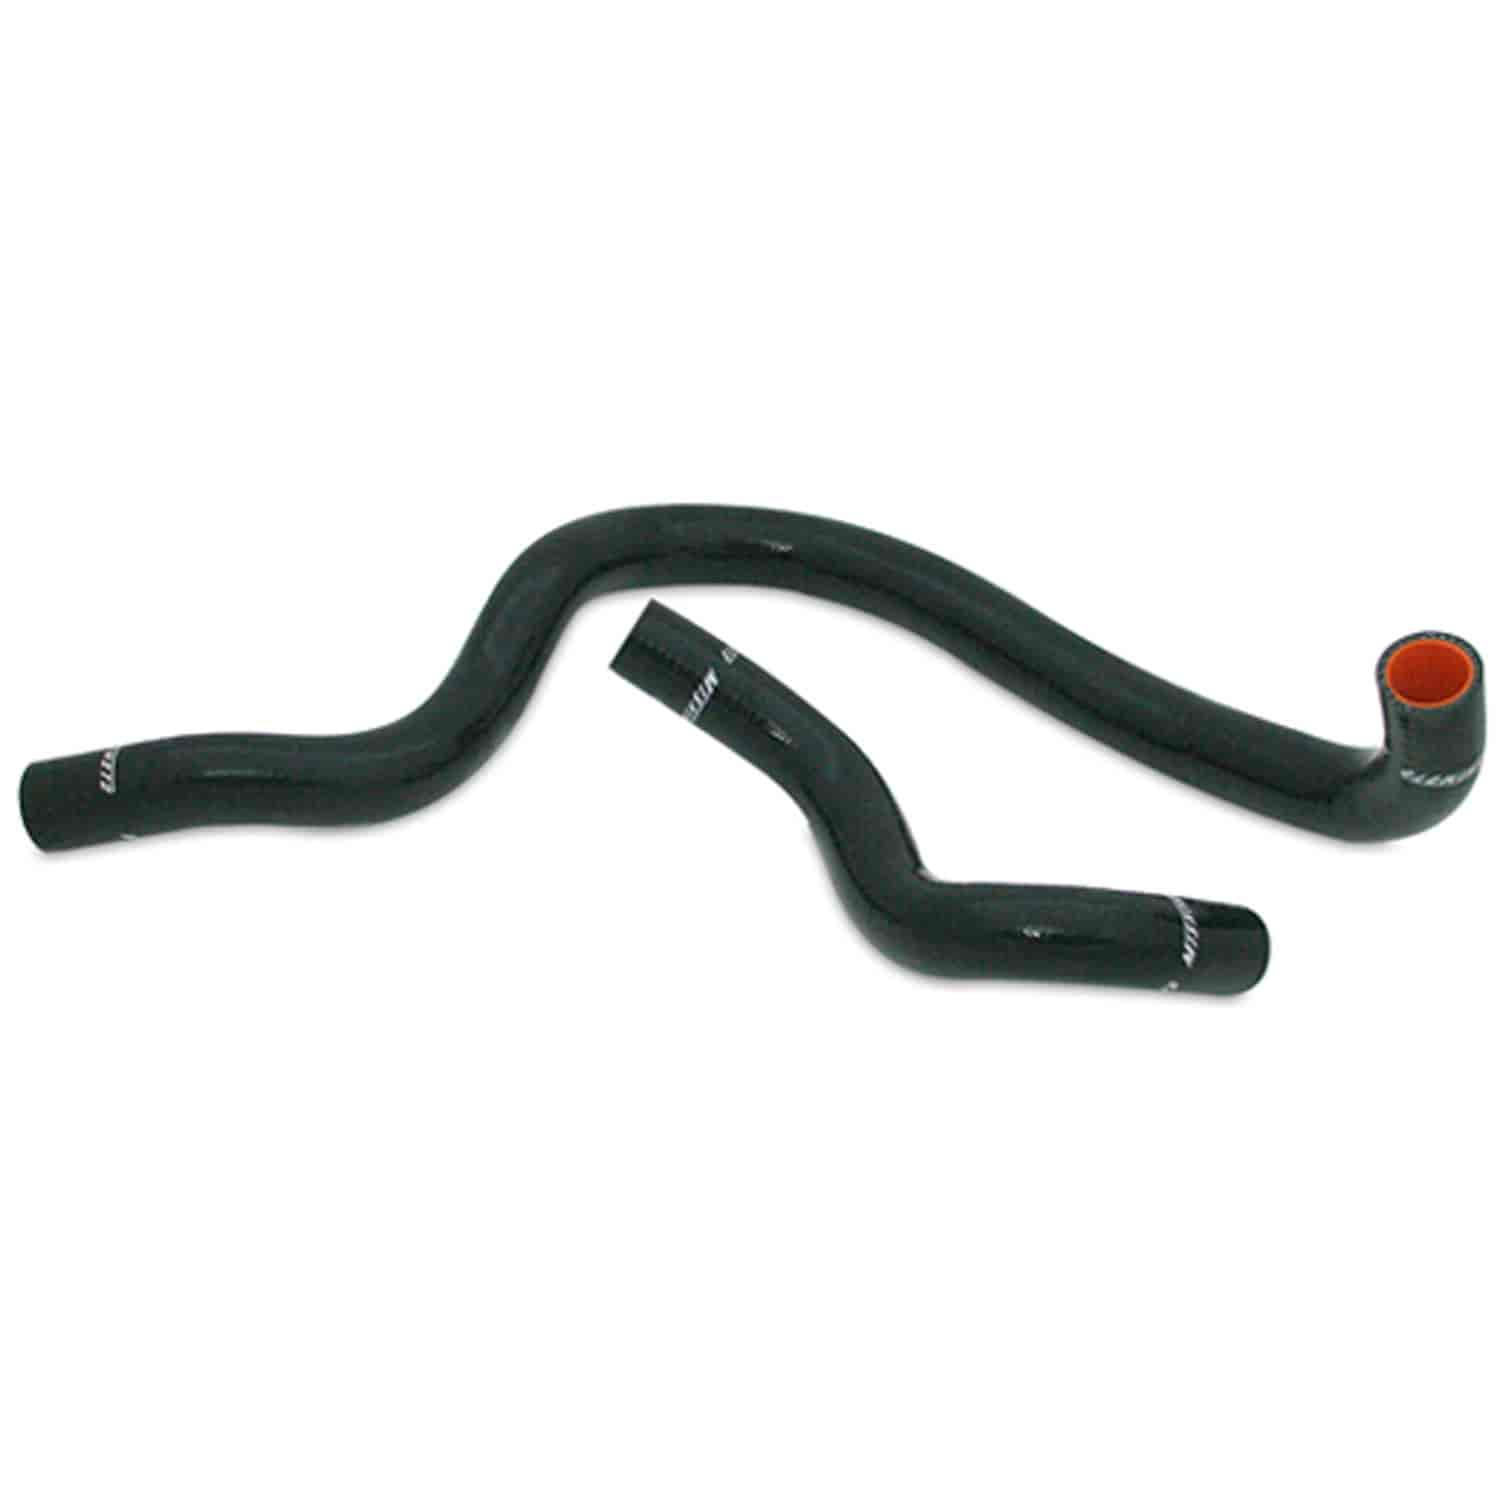 Silicone Radiator Hose Kit.This kit will fit both the Honda Prelude and Accord. - MFG Part No. MMHOSE-PRE-97BK